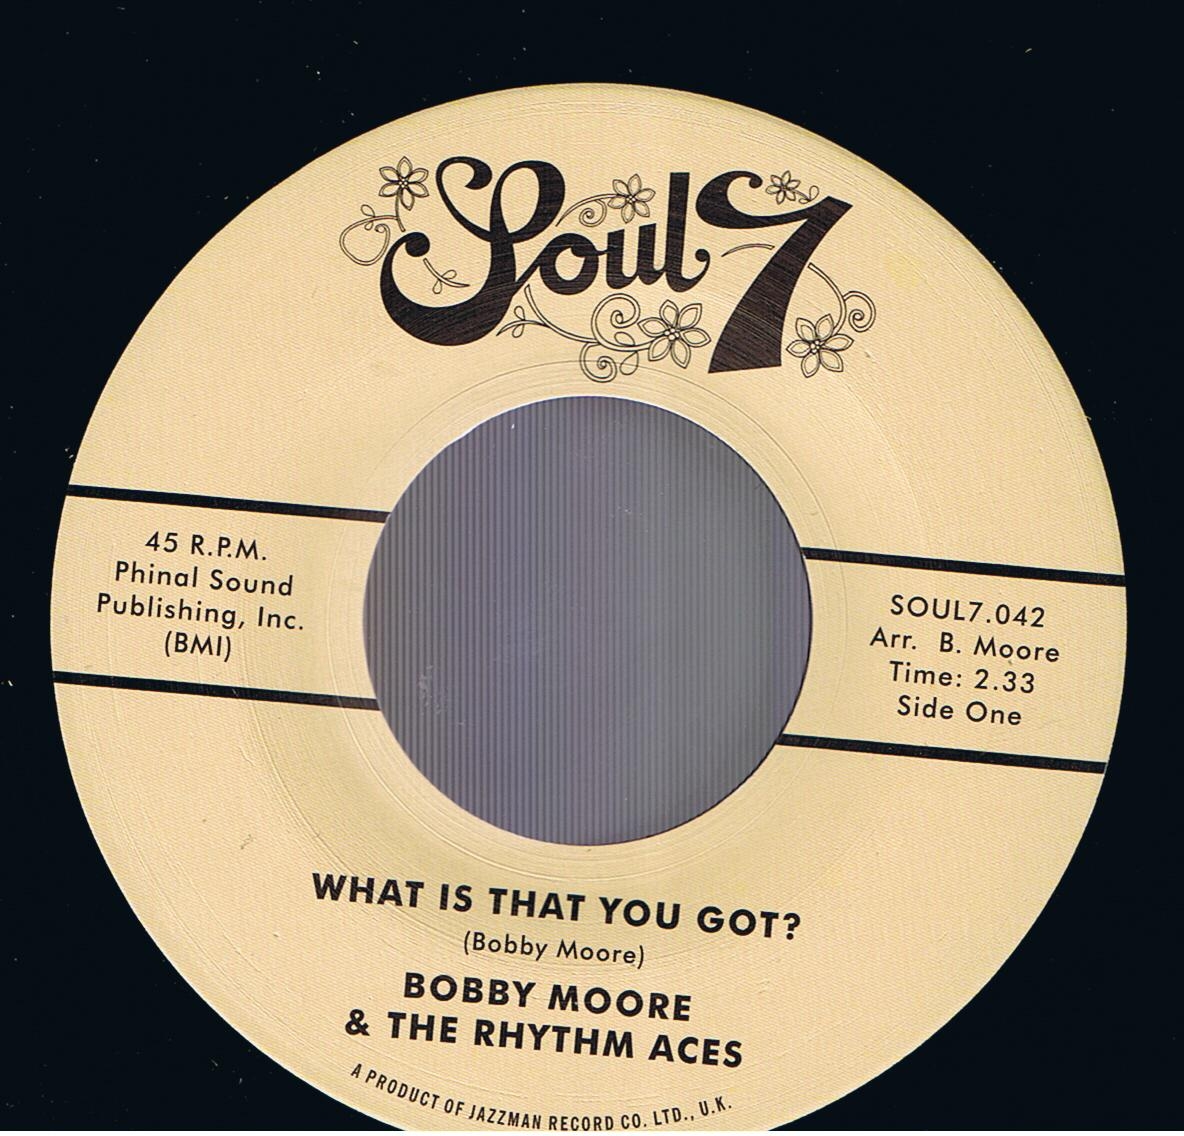 Bobby Moore & The Rhythm Aces - What Is That You Got / Bobby Moore & The Rhythm Aces - Love's Got A Hold On Me (7")